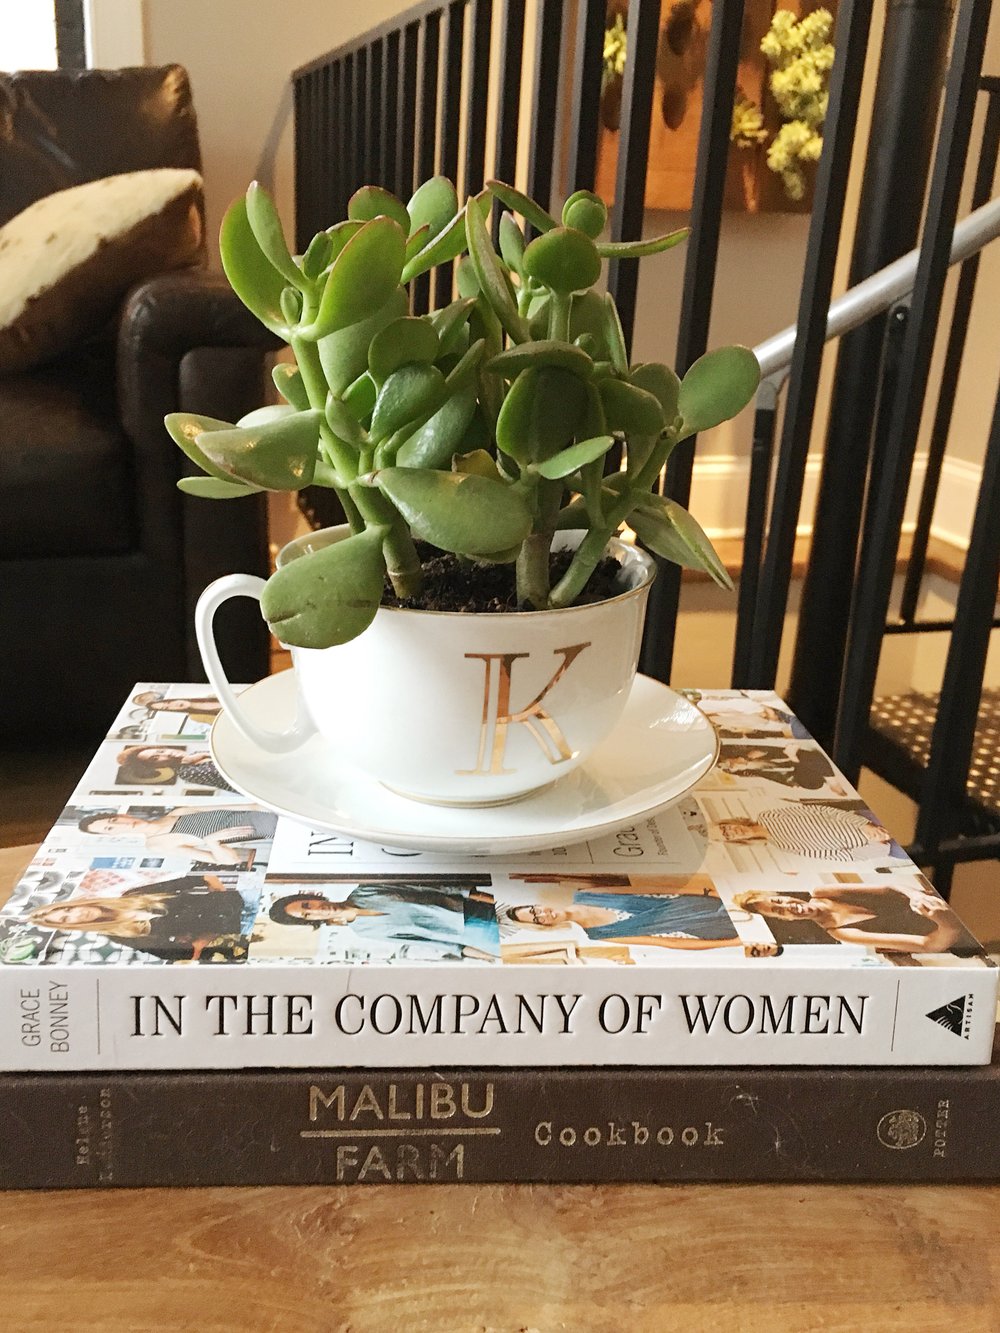 My Top Coffee Table Books for 2023 - An Edited Lifestyle